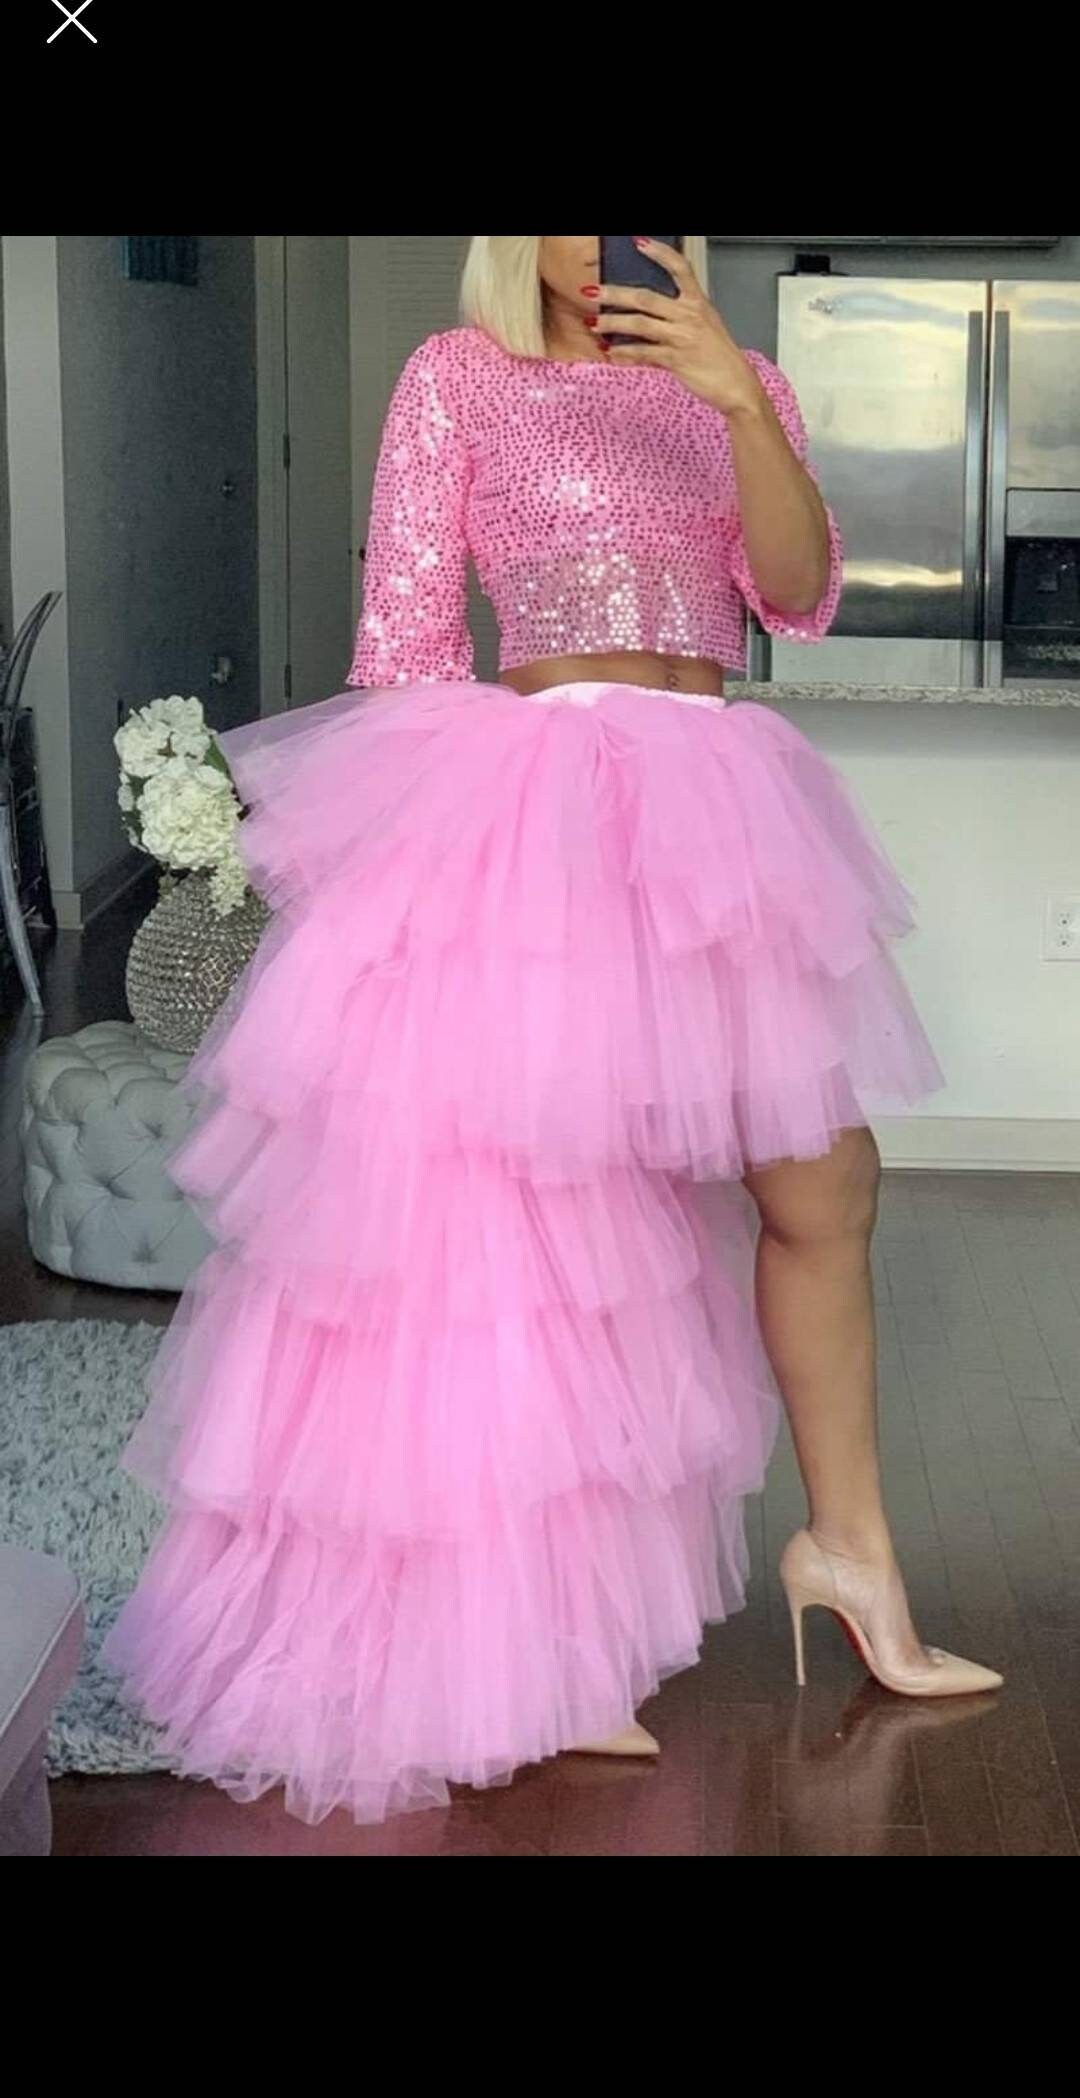 Pink Tull Prom Outfit - Etsy